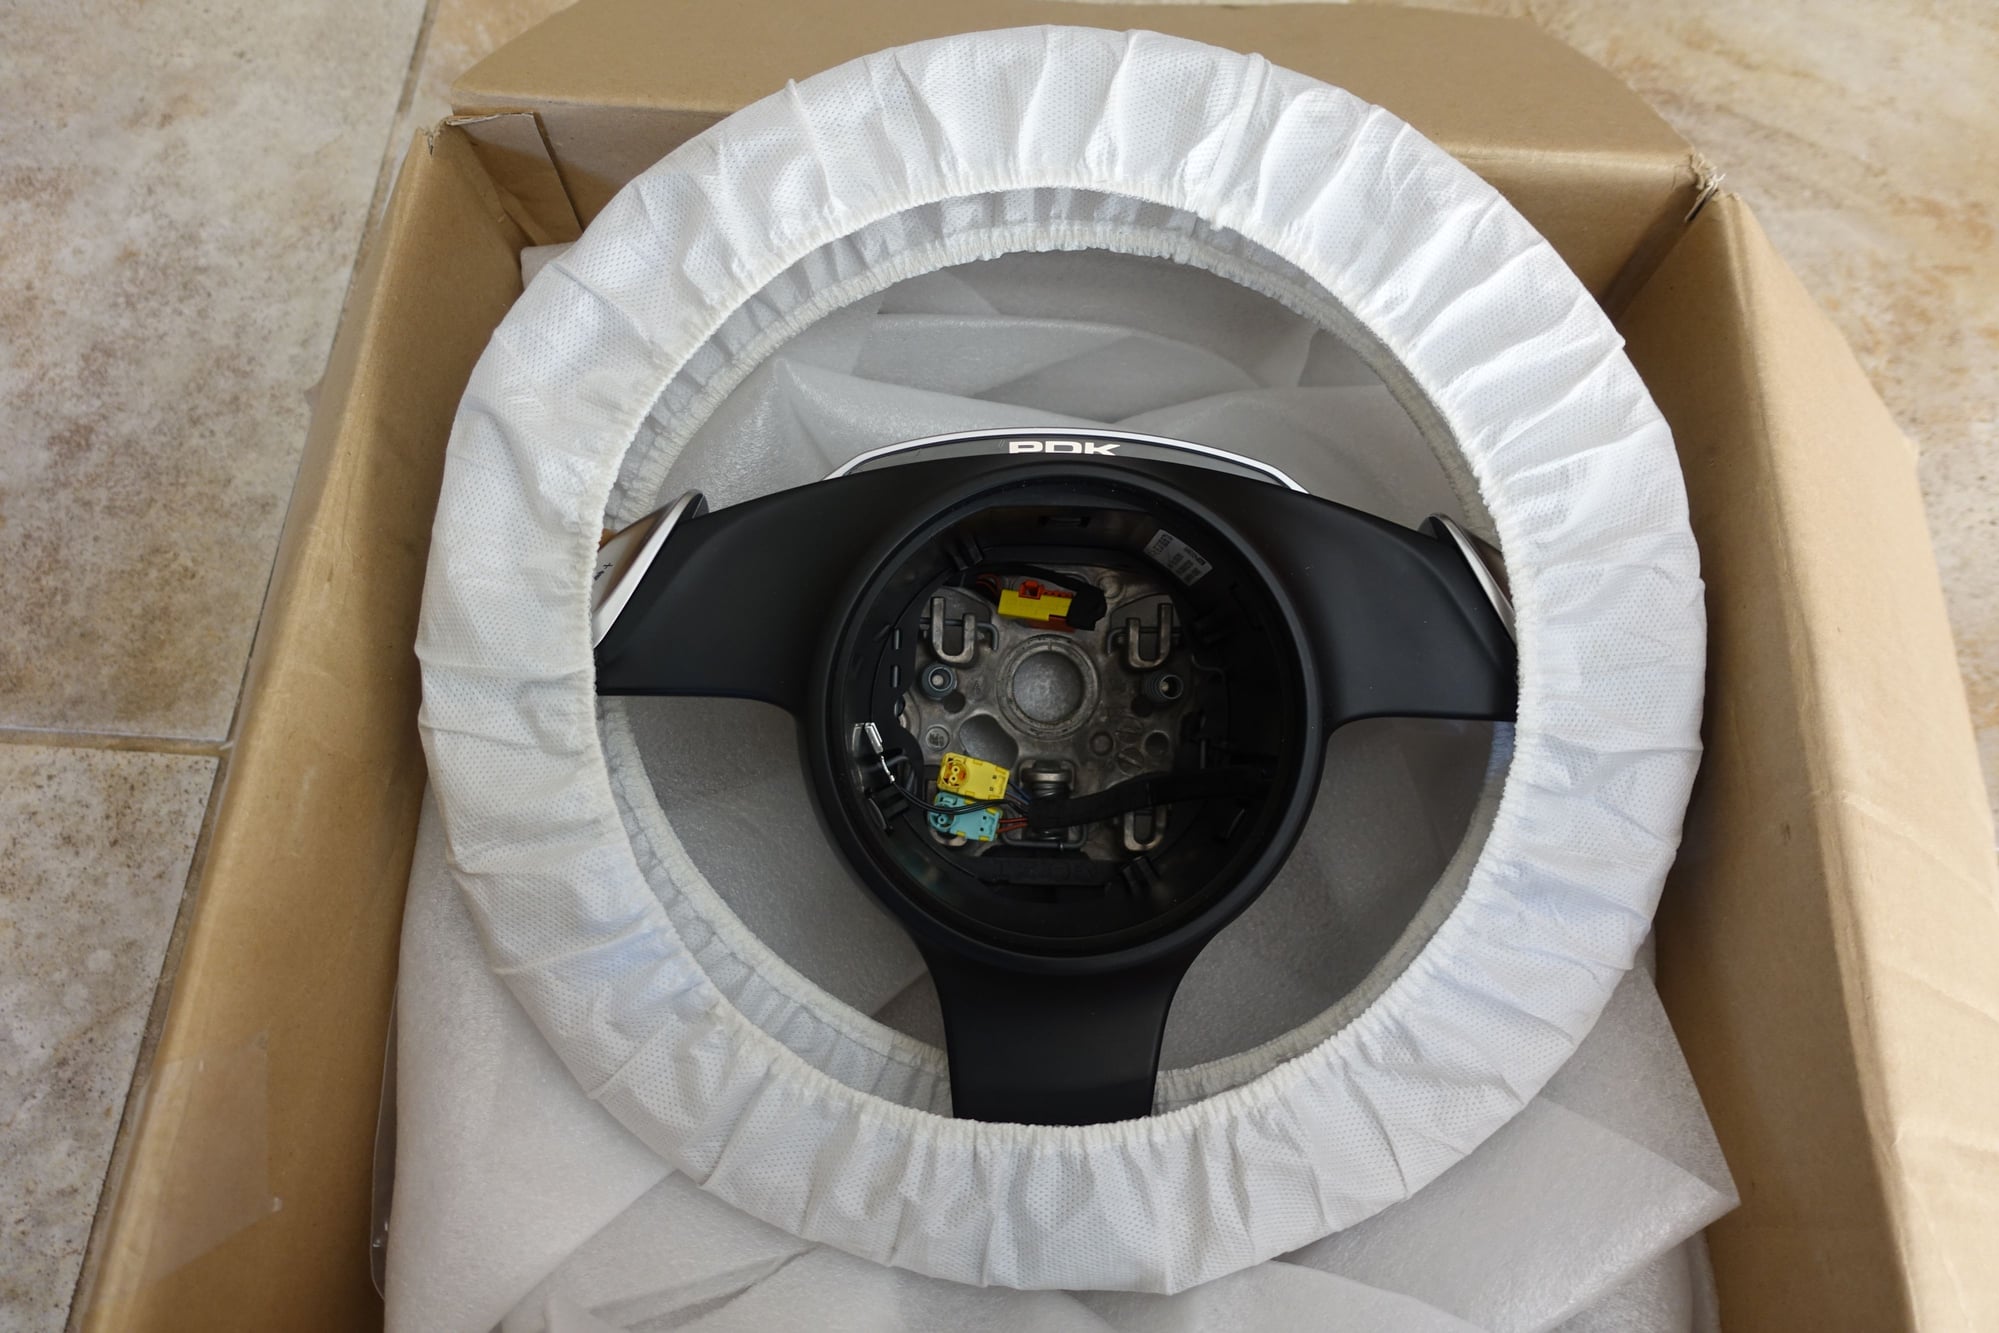 Interior/Upholstery - 997.2 PDK Steering Wheel with Sport, Sport+, and Launch Control indicators - Used - 2009 to 2012 Porsche 911 - Urbandale, IA 50323, United States